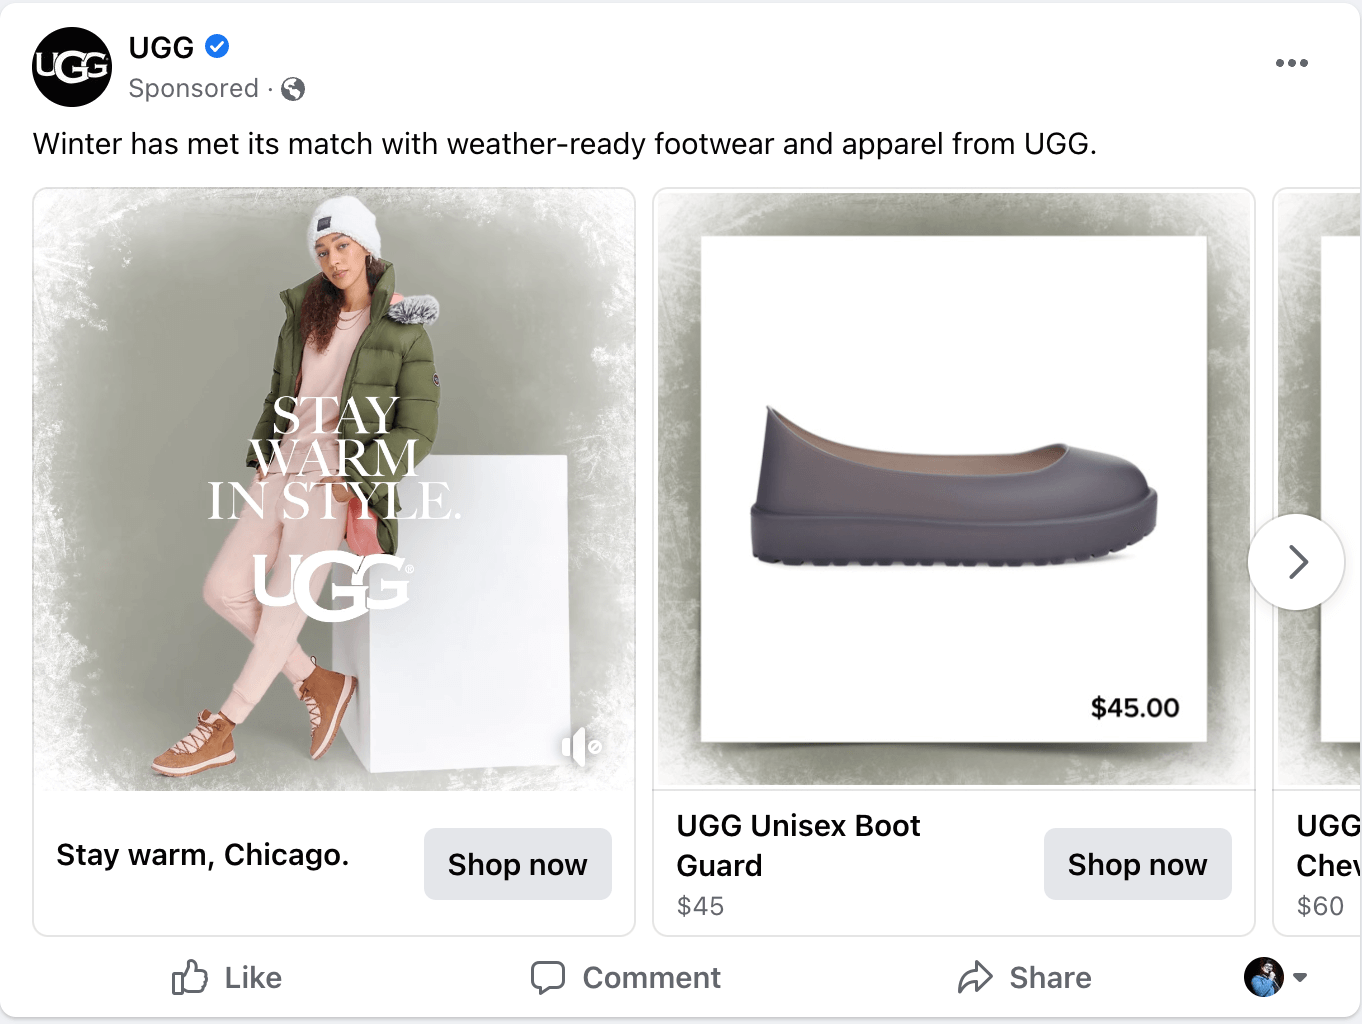 A Facebook ad for Uggs